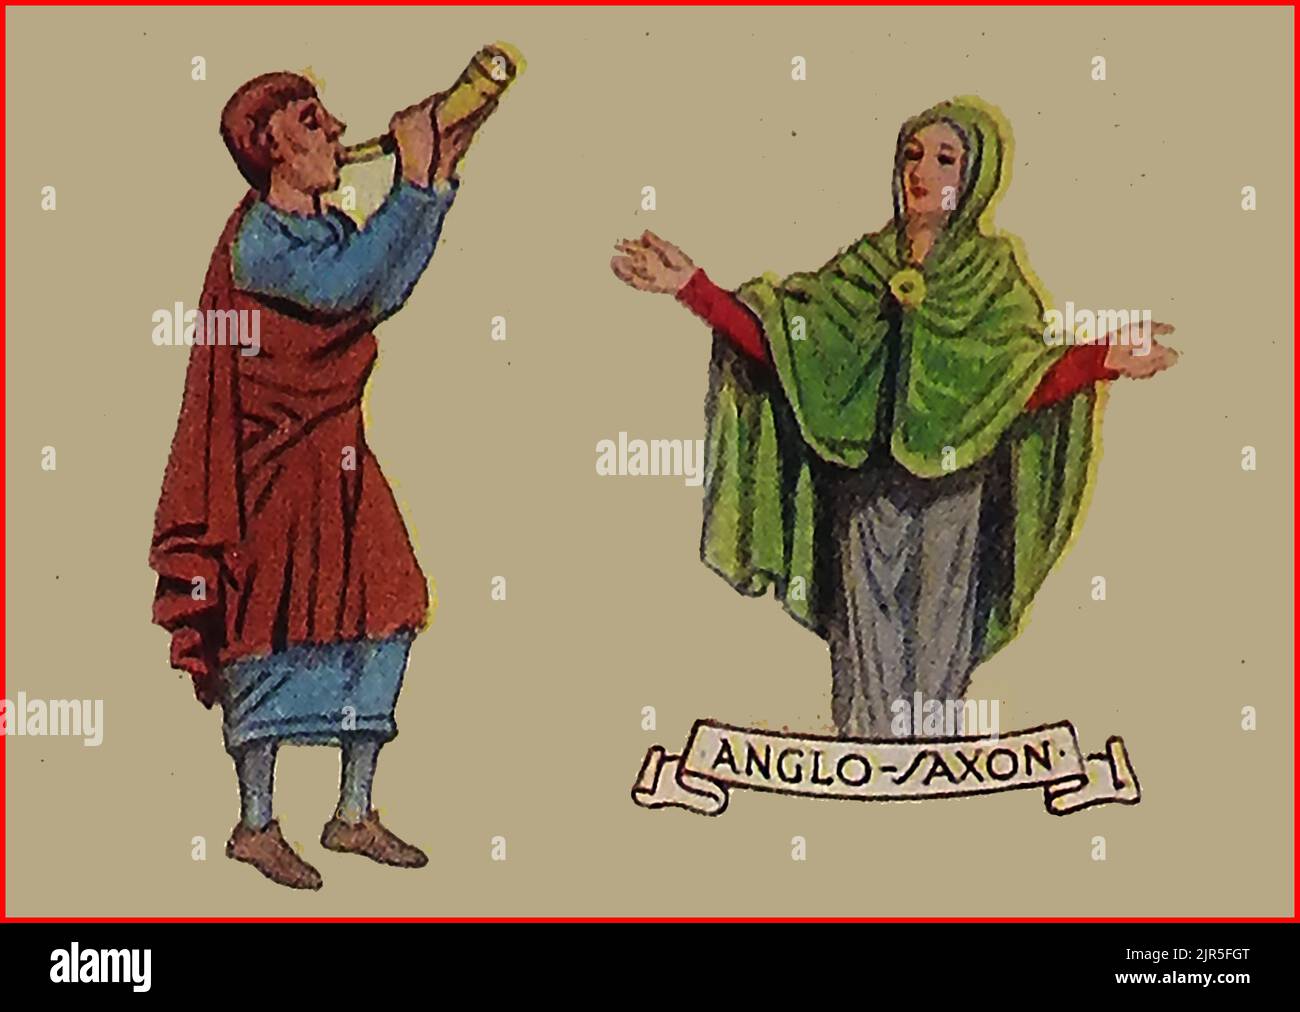 FASHIONS IN BRITAIN - An old coloured image showing typical clothing in Anglo-Saxon times. Stock Photo